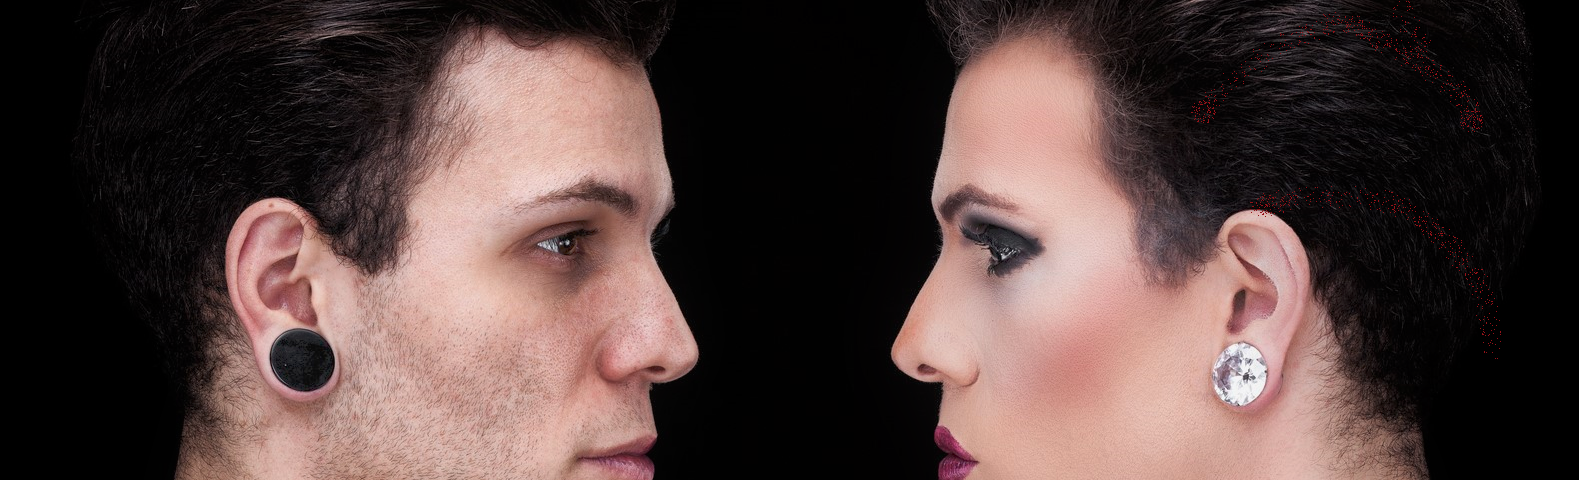 Profile of an ordinary  man facing a mirror image of himself with makeup on